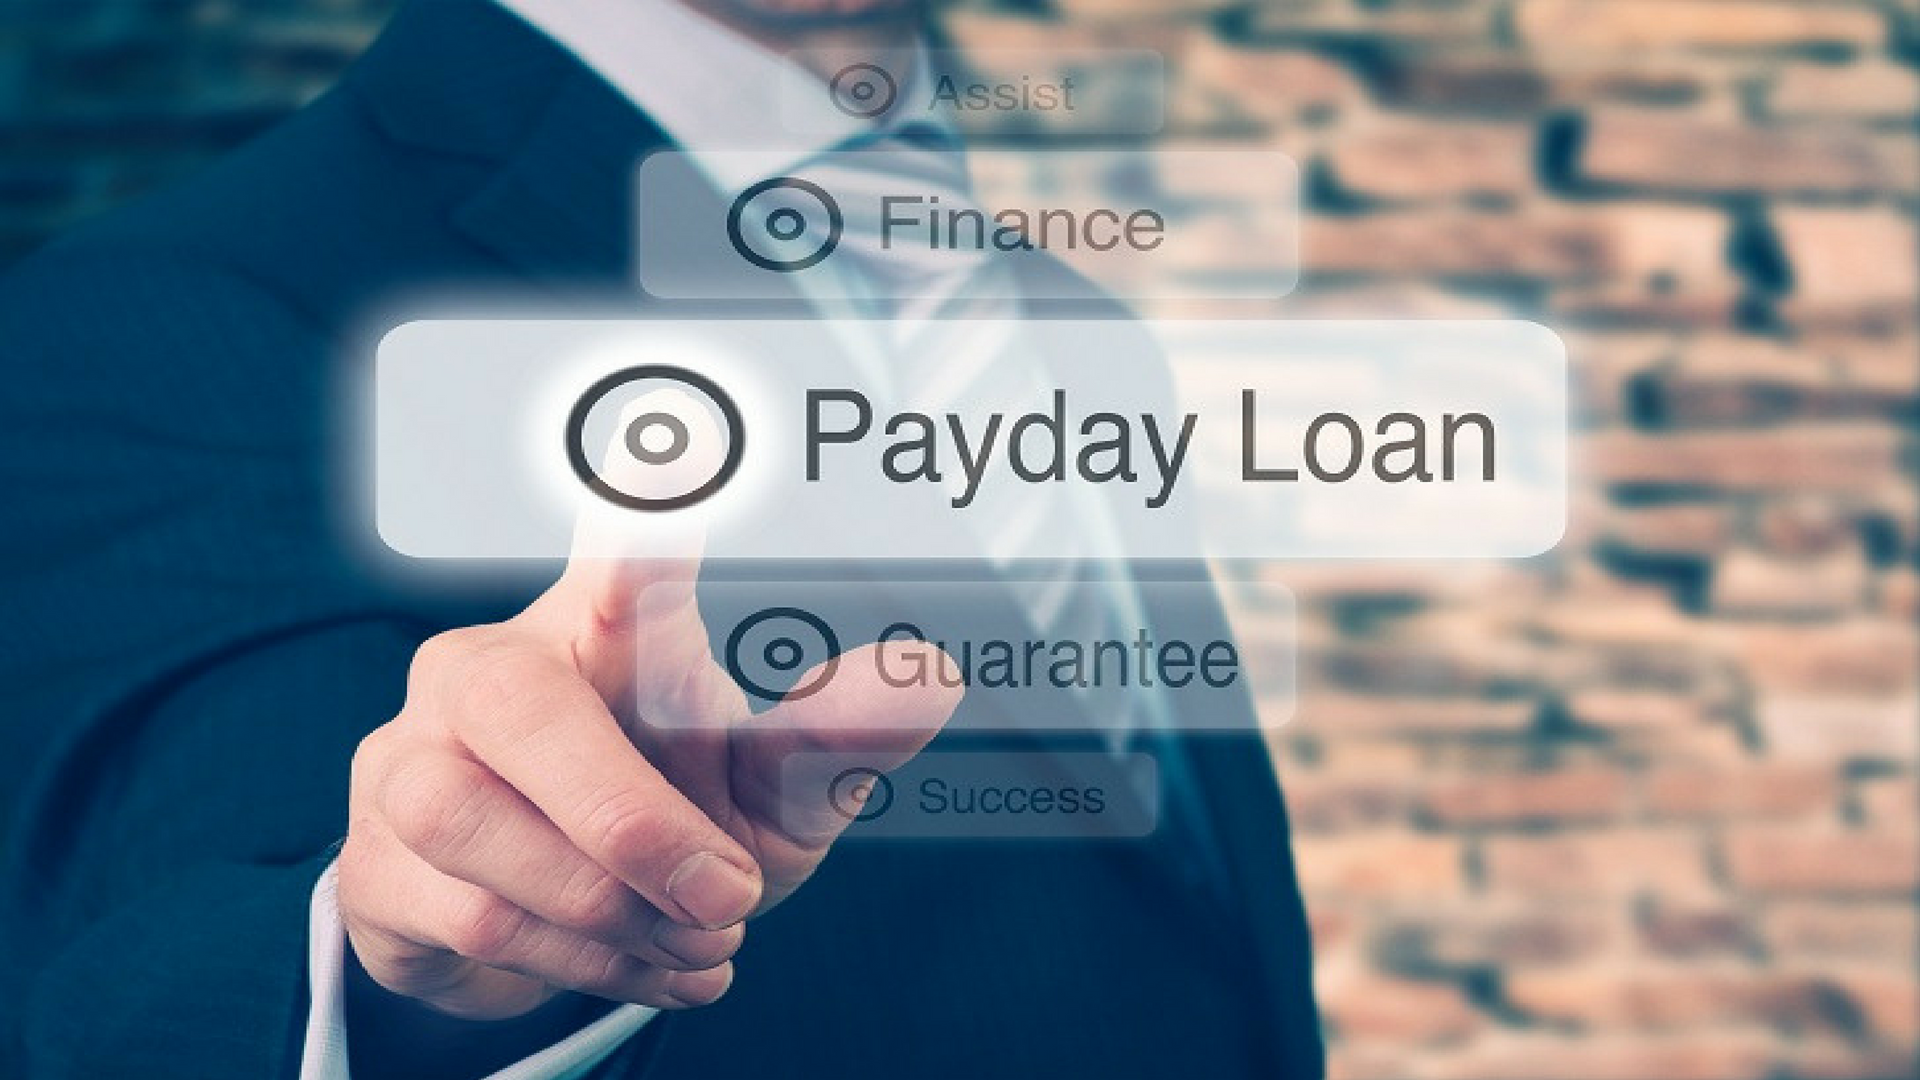 How To Apply For A Payday Loan Online –Check the steps